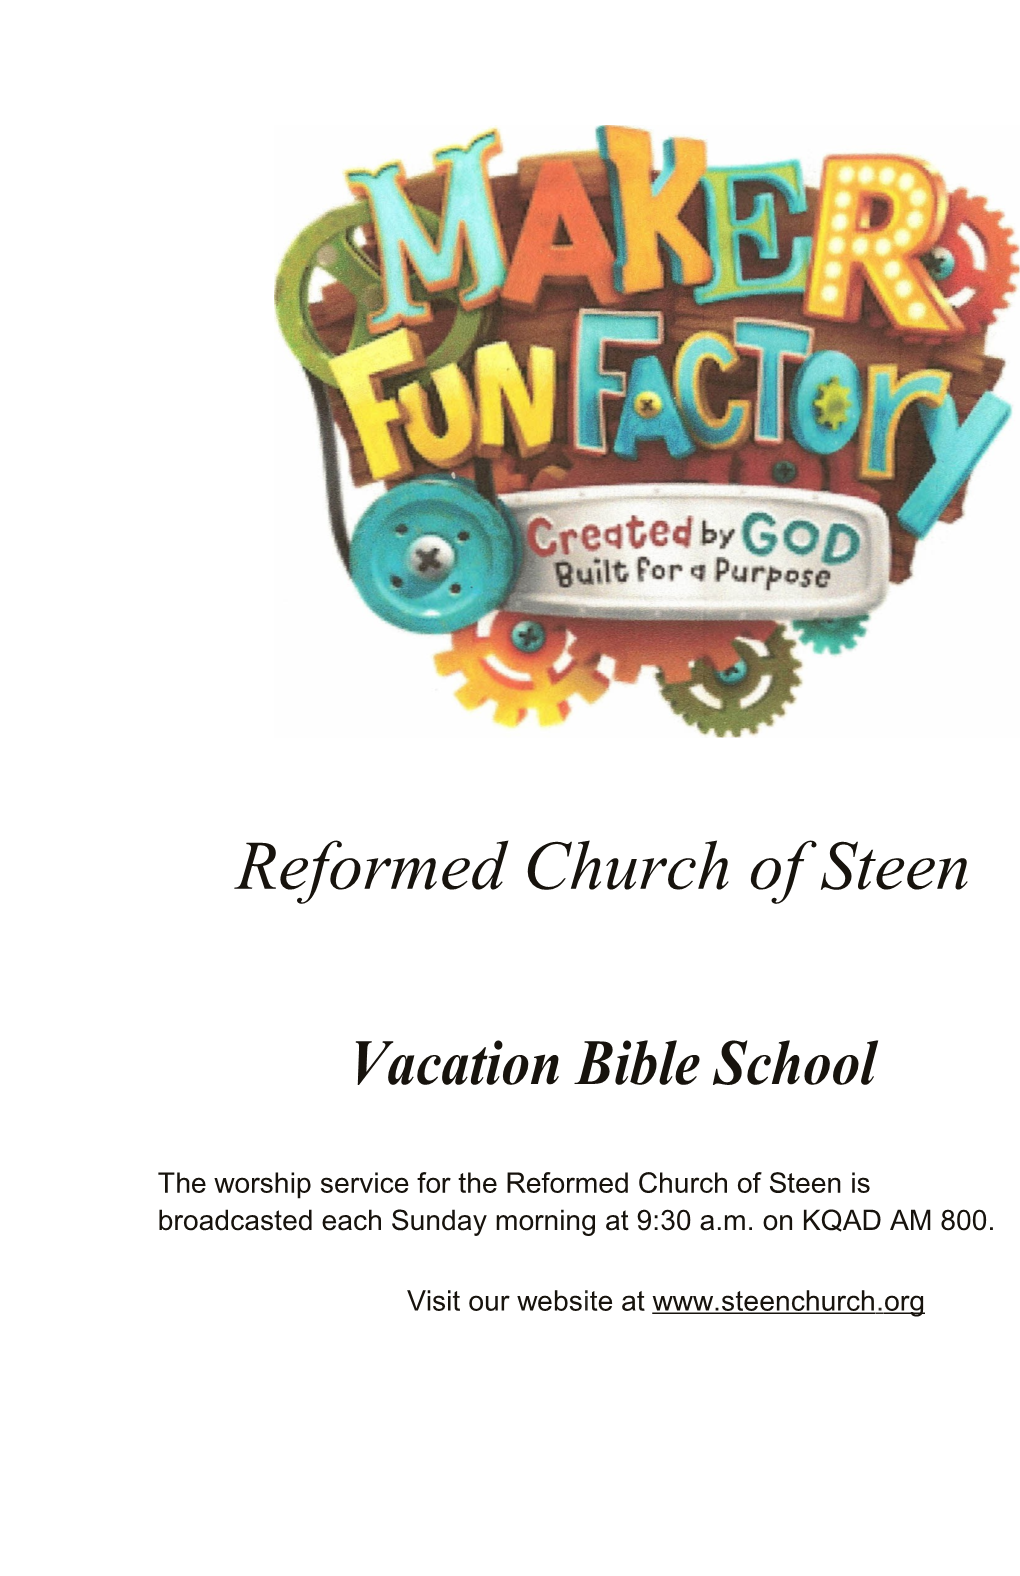 The Worship Service for the Reformed Church of Steen Is